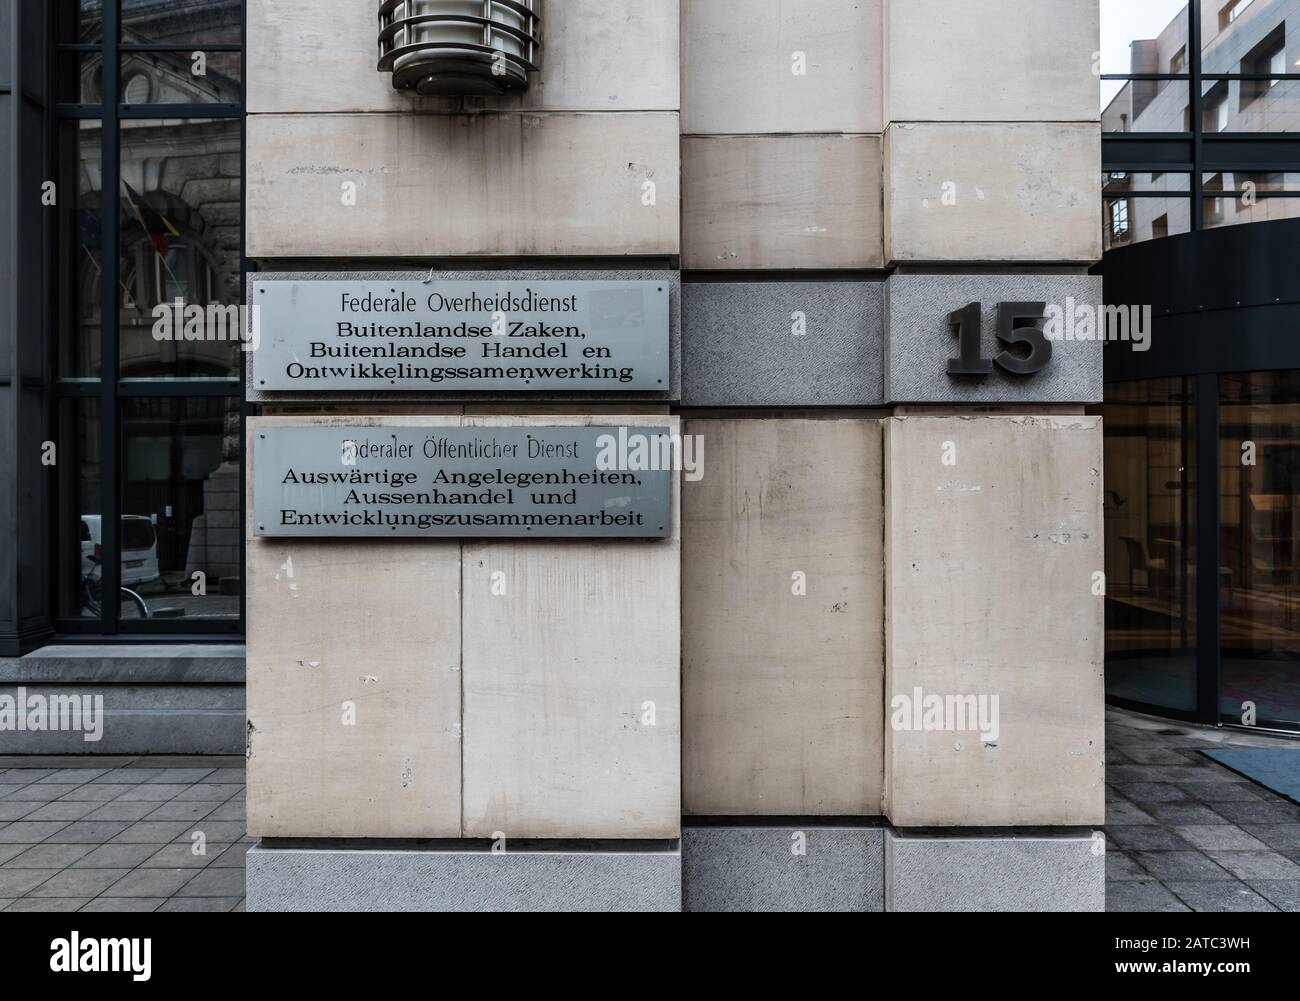 Brussels Old Town, Brussels Capital Region / Belgium - 12 20 2019: Embossed silver signs in four languages at the entrance of the Federal Public Servi Stock Photo